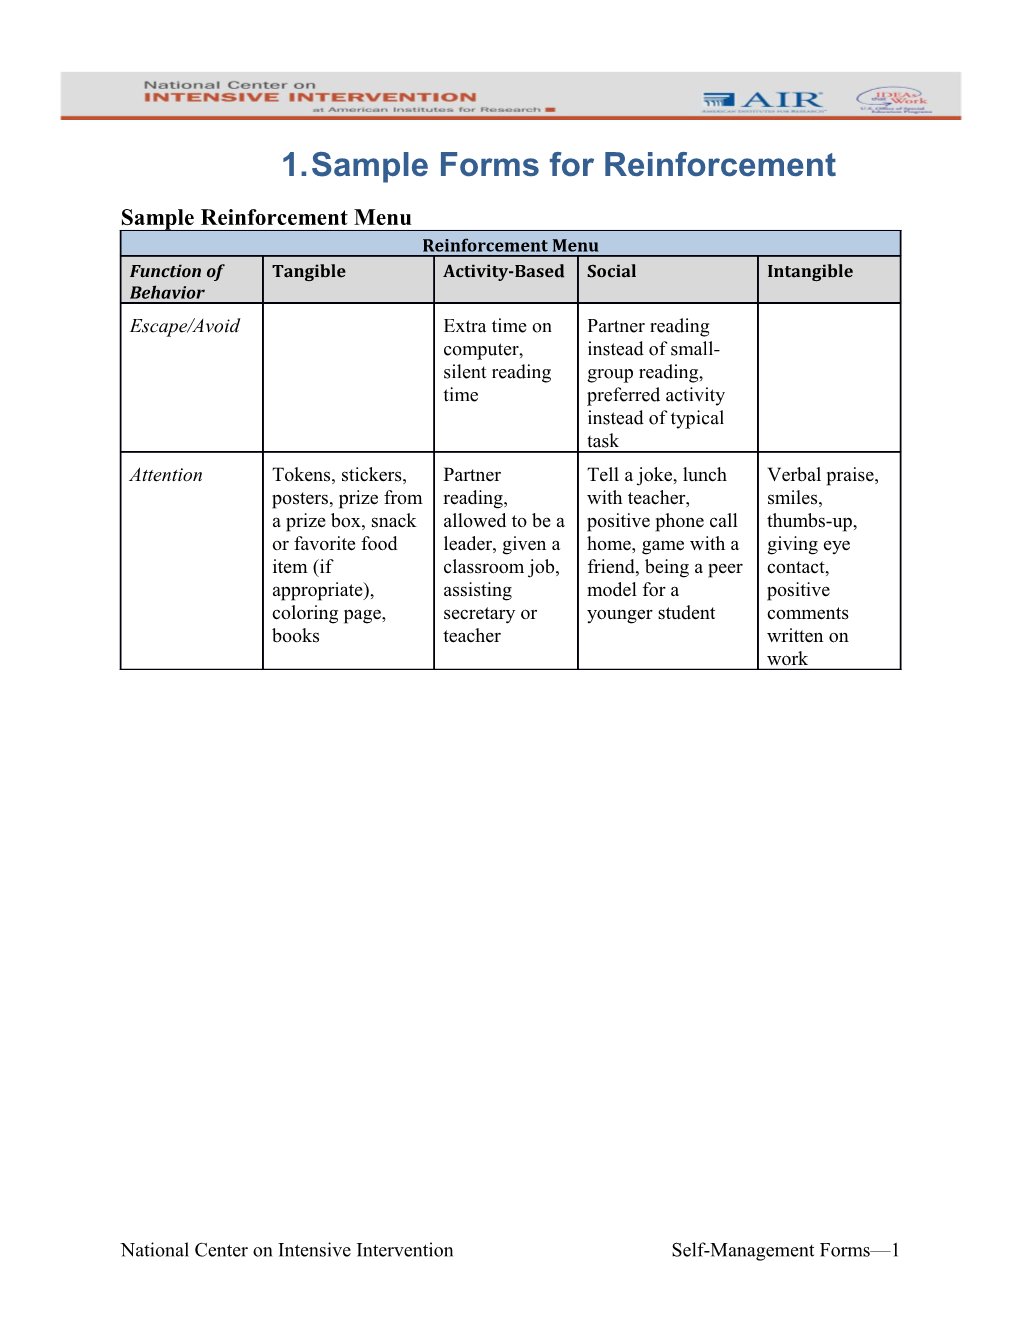 Sample Forms for Reinforcement